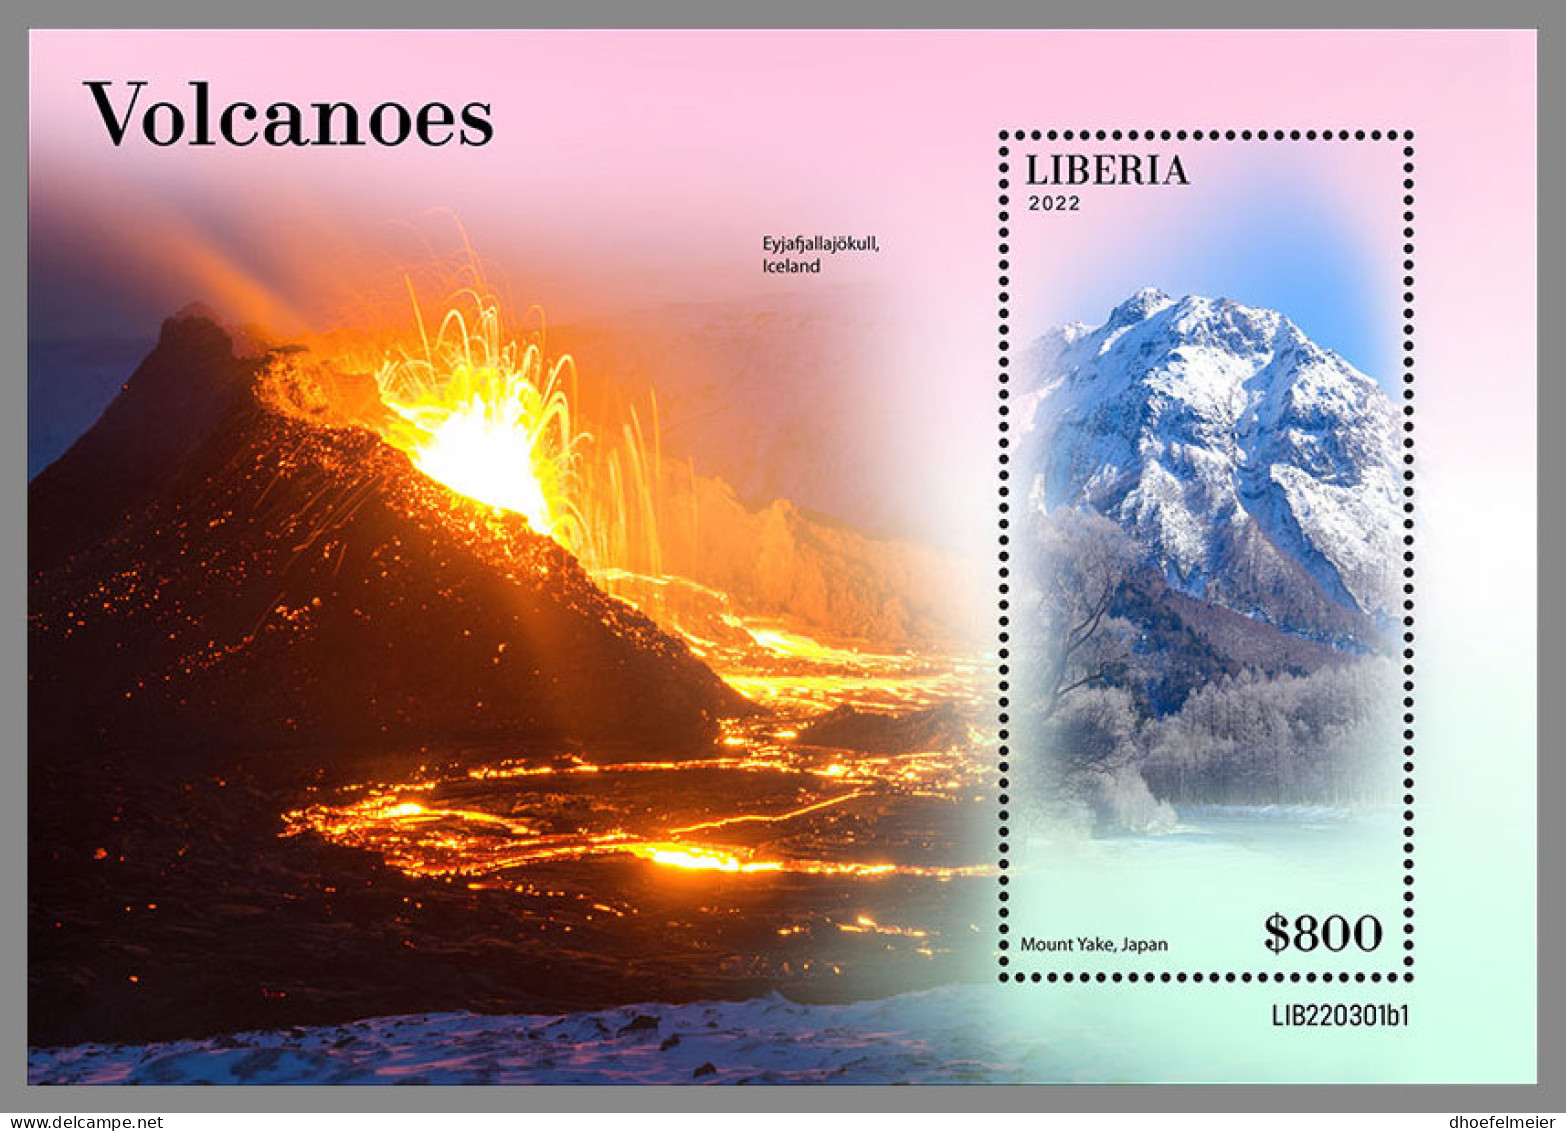 LIBERIA 2022 MNH Volcanoes Vulkane Volcans S/S I - OFFICIAL ISSUE - DHQ2312 - Volcans